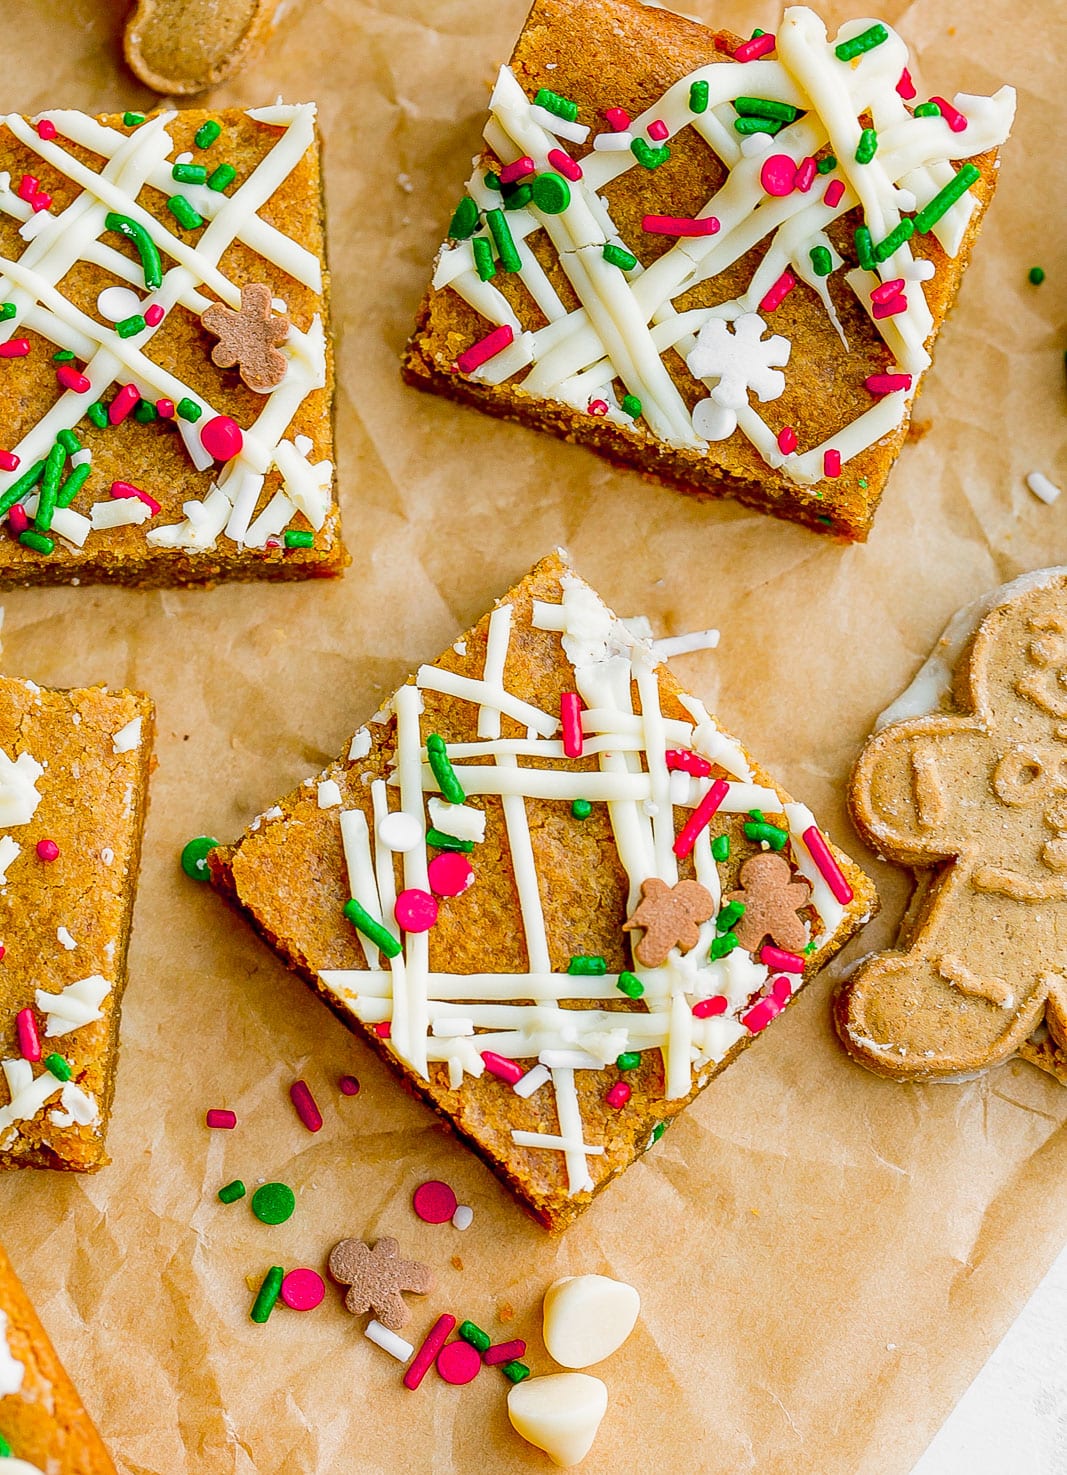 White chocolate drizzled cookie bars.